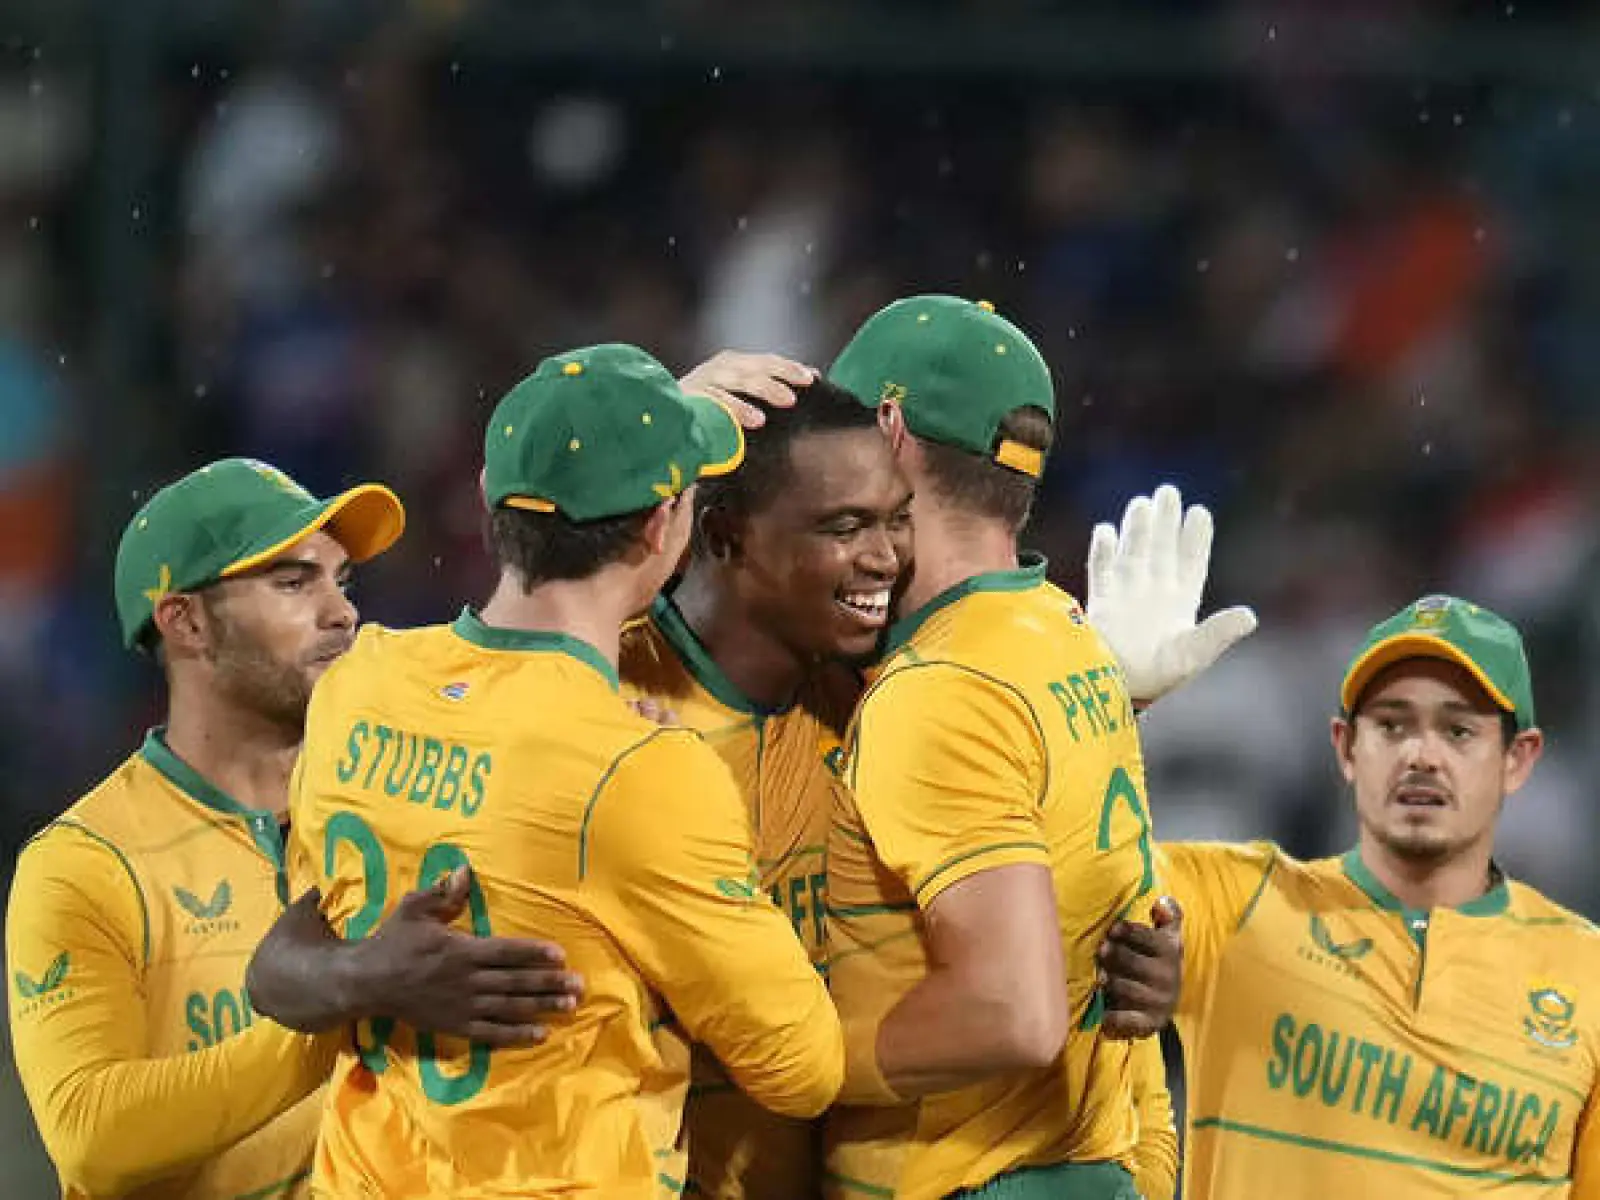 South Africa changed the entire team for the T20 series against India, only 1 old face in the team